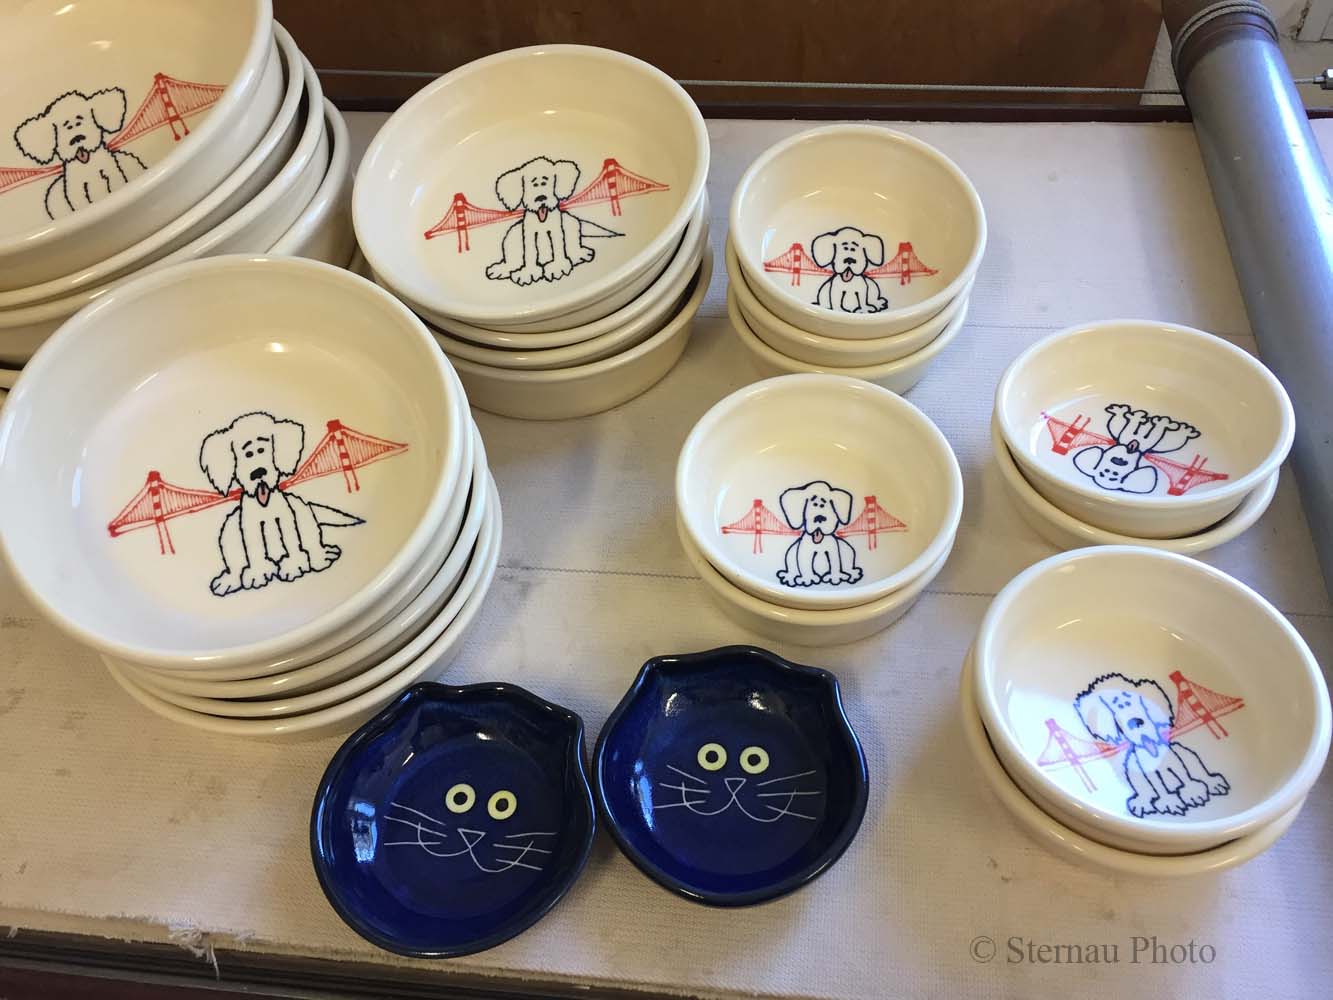 Dog and Cat Dishes from Sausalito Pottery, Ceramic Innovations